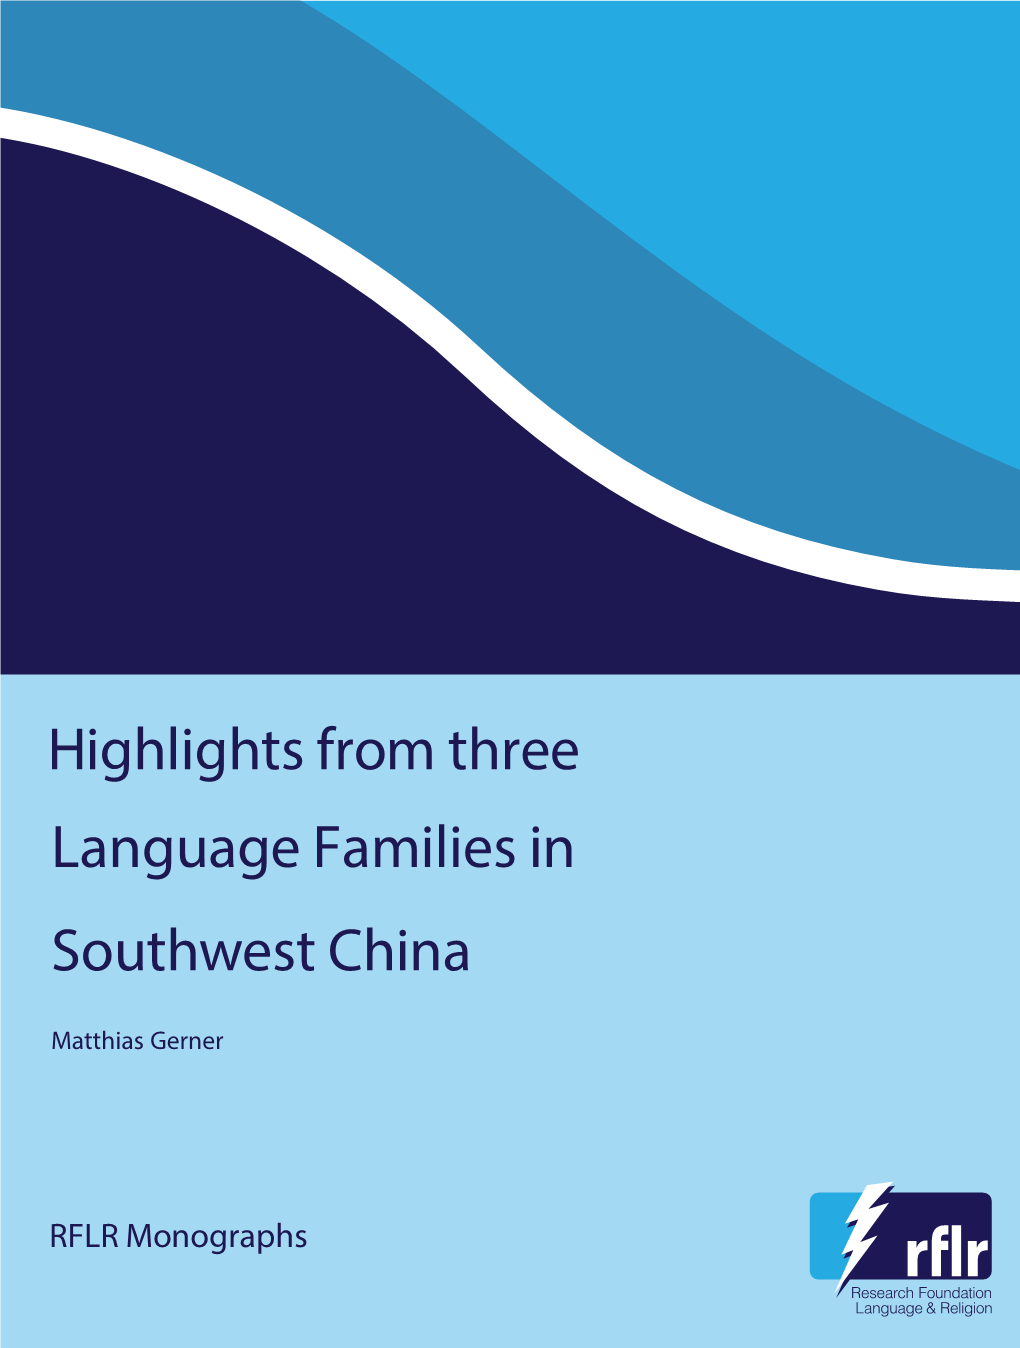 Highlights from Three Language Families in Southwest China